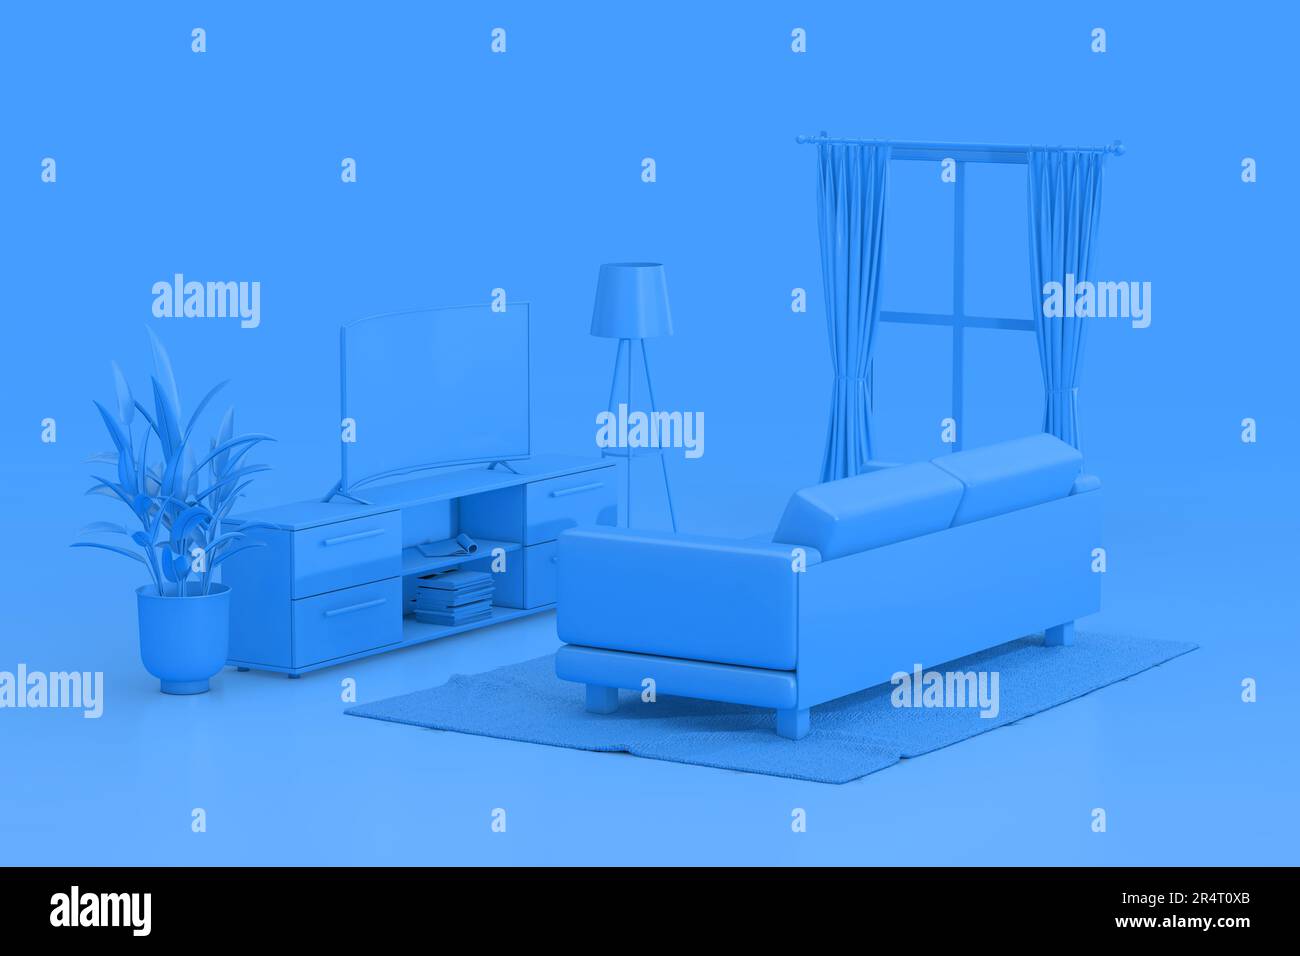 Blue Monochrome Duotone Room Modern Interior with Window, TV, Carpet and Sofa on a blue background. 3d Rendering Stock Photo